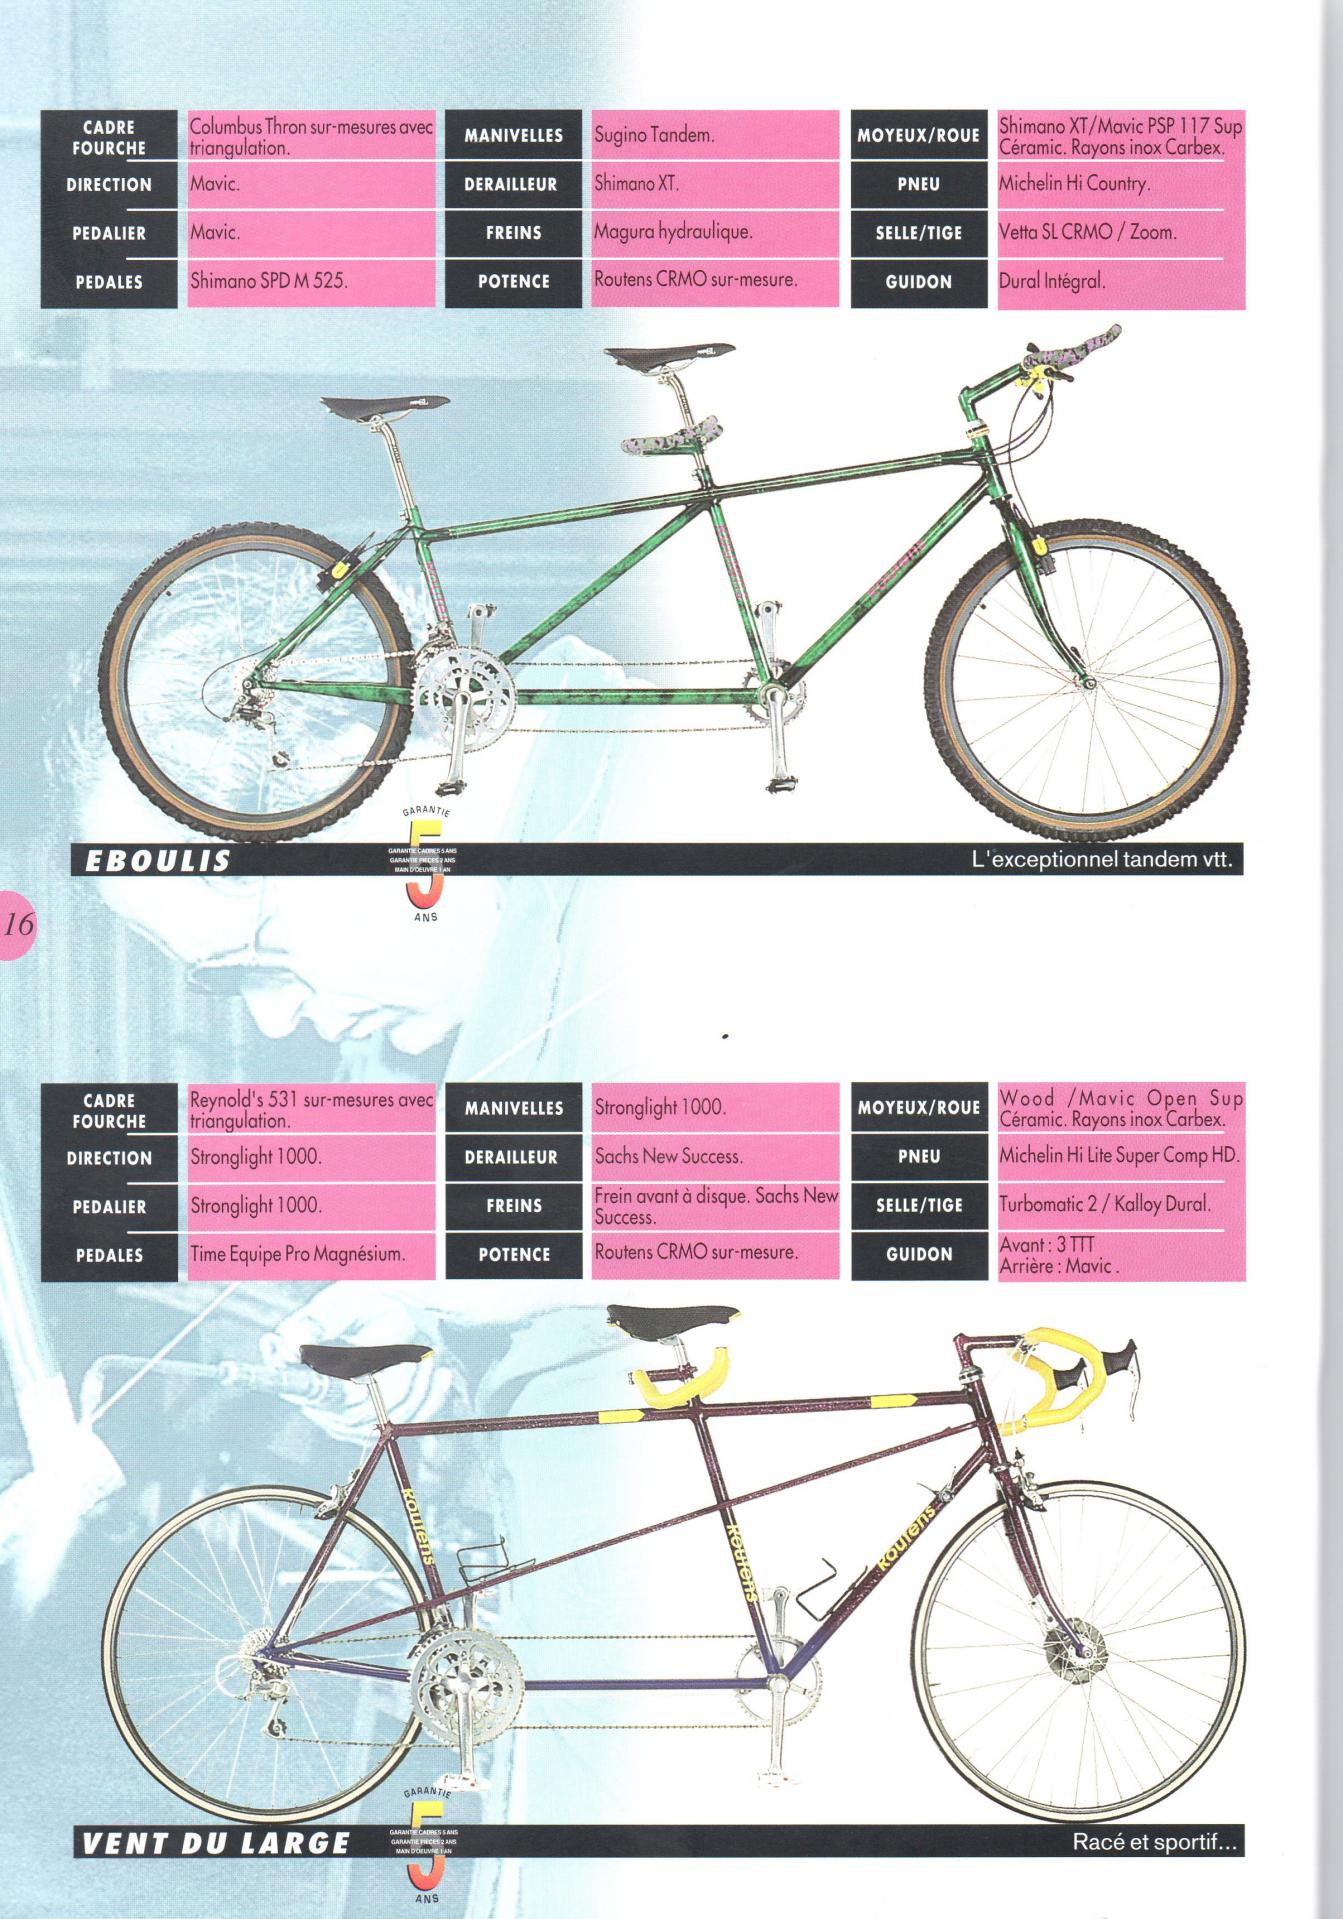 Routens cycles catalogue 1994 16